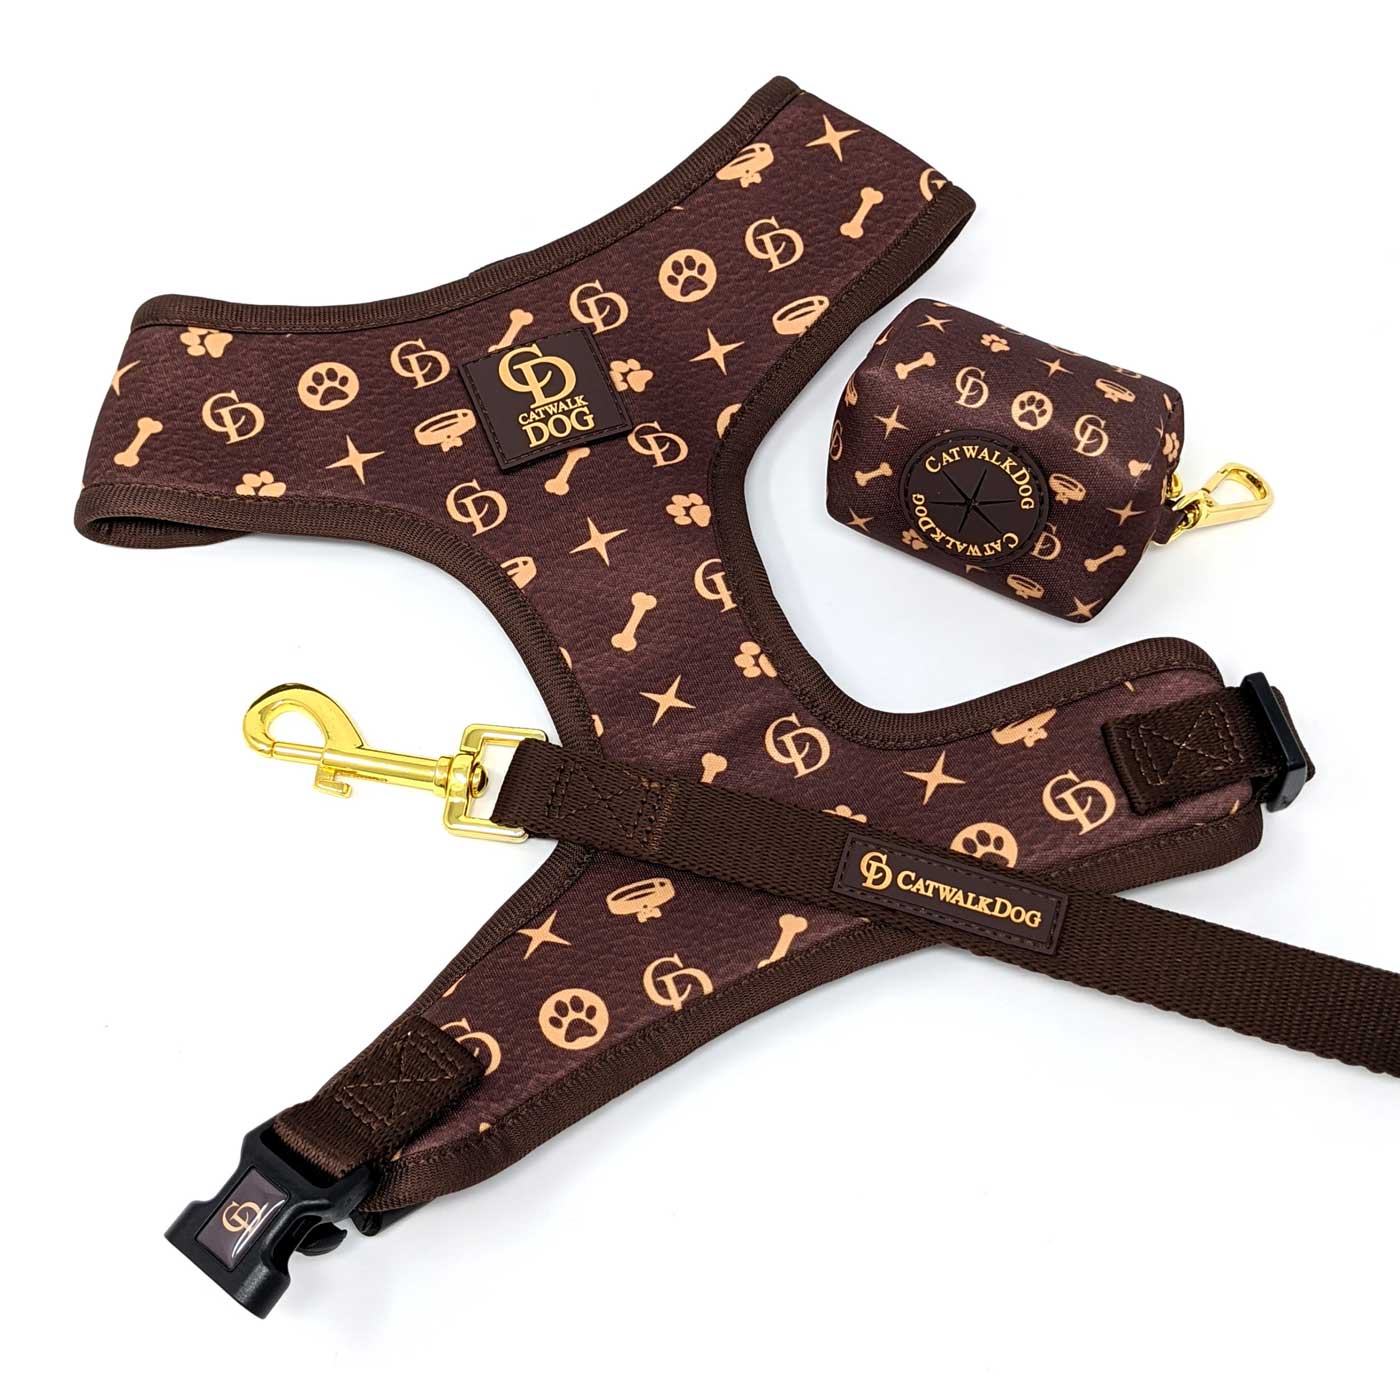 CHEWY VUITTON HARNESS AND LEAD